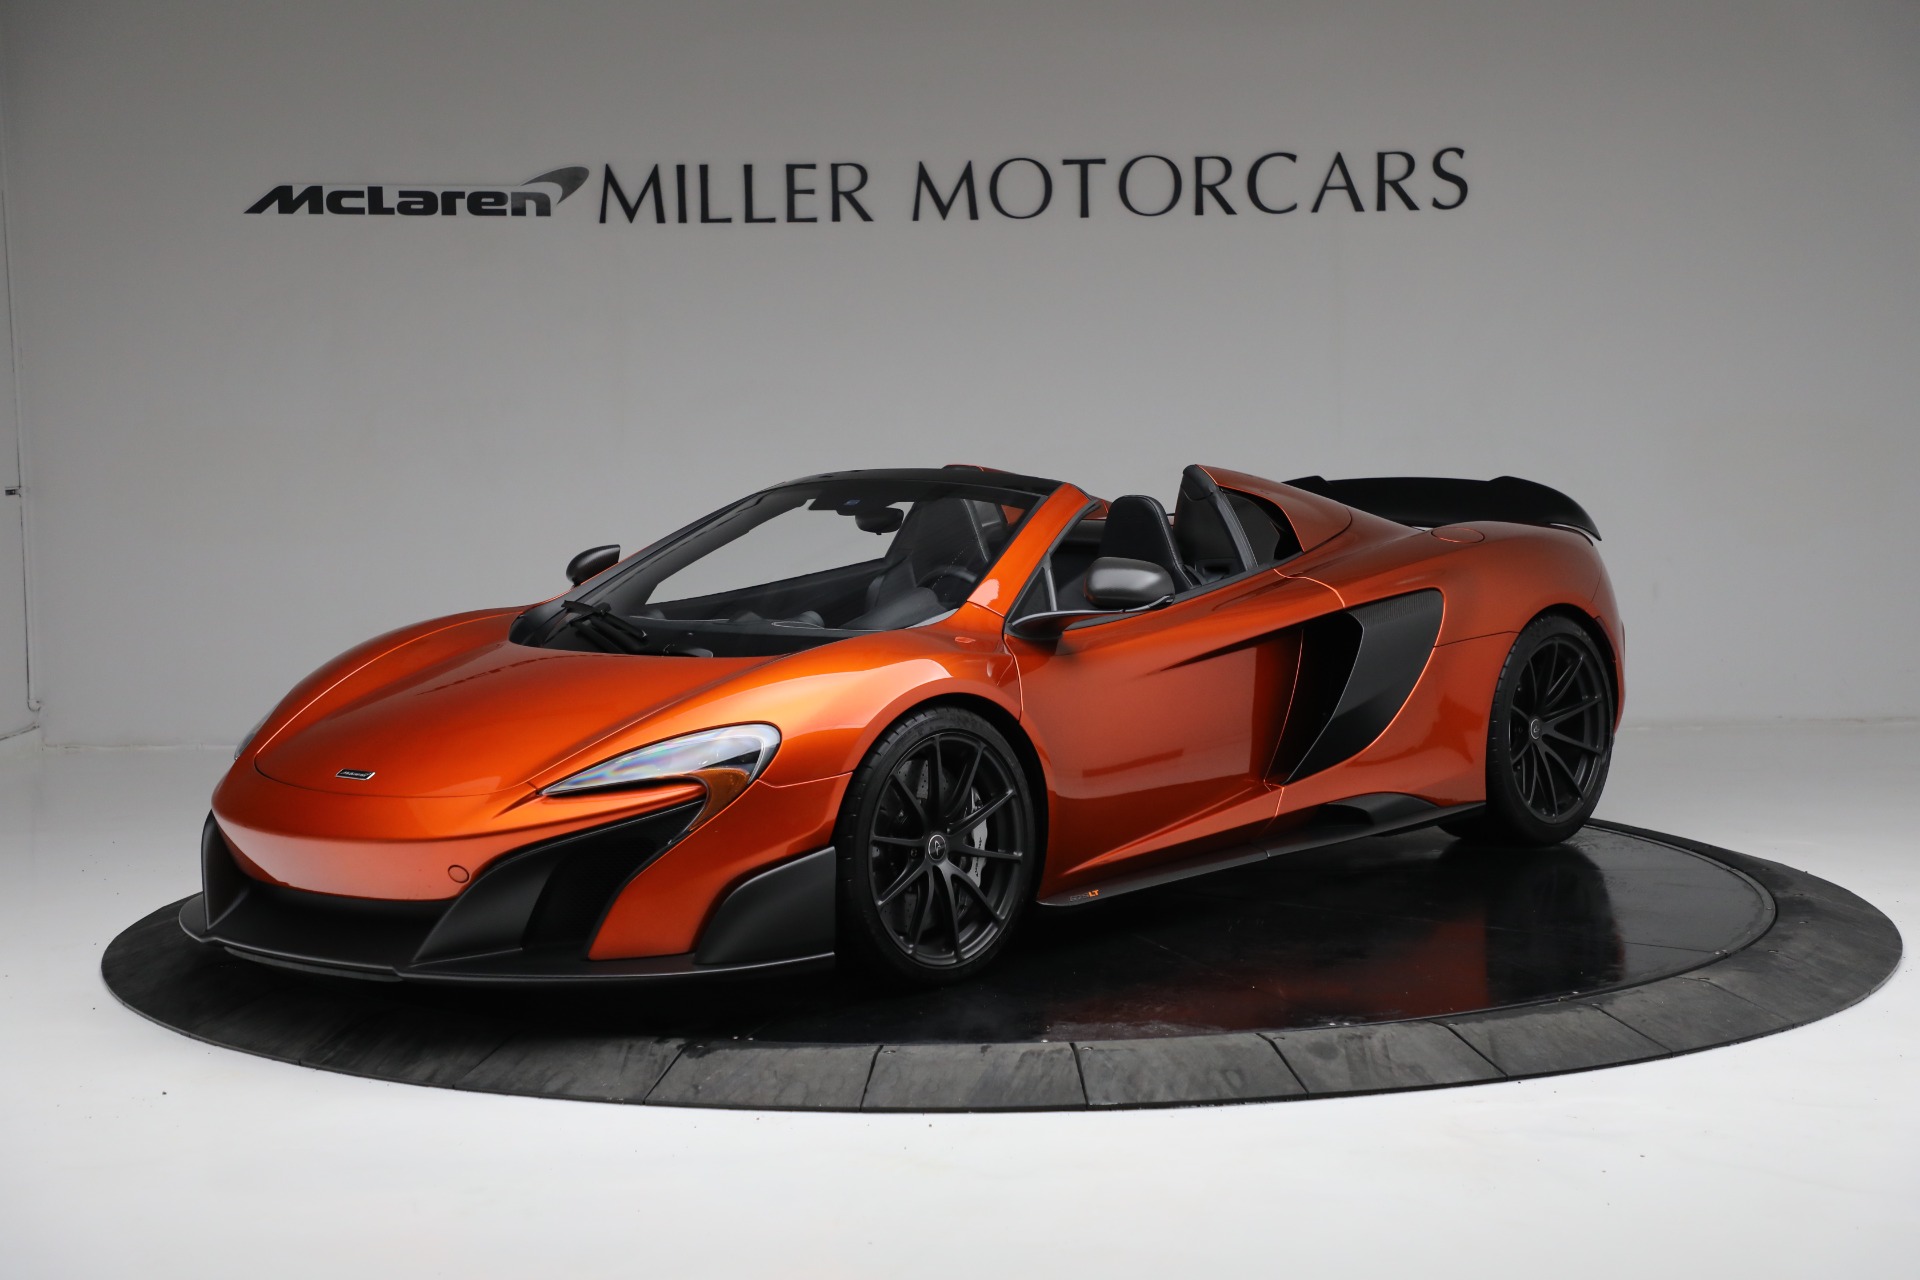 Used 2016 McLaren 675LT Spider for sale $299,900 at Aston Martin of Greenwich in Greenwich CT 06830 1